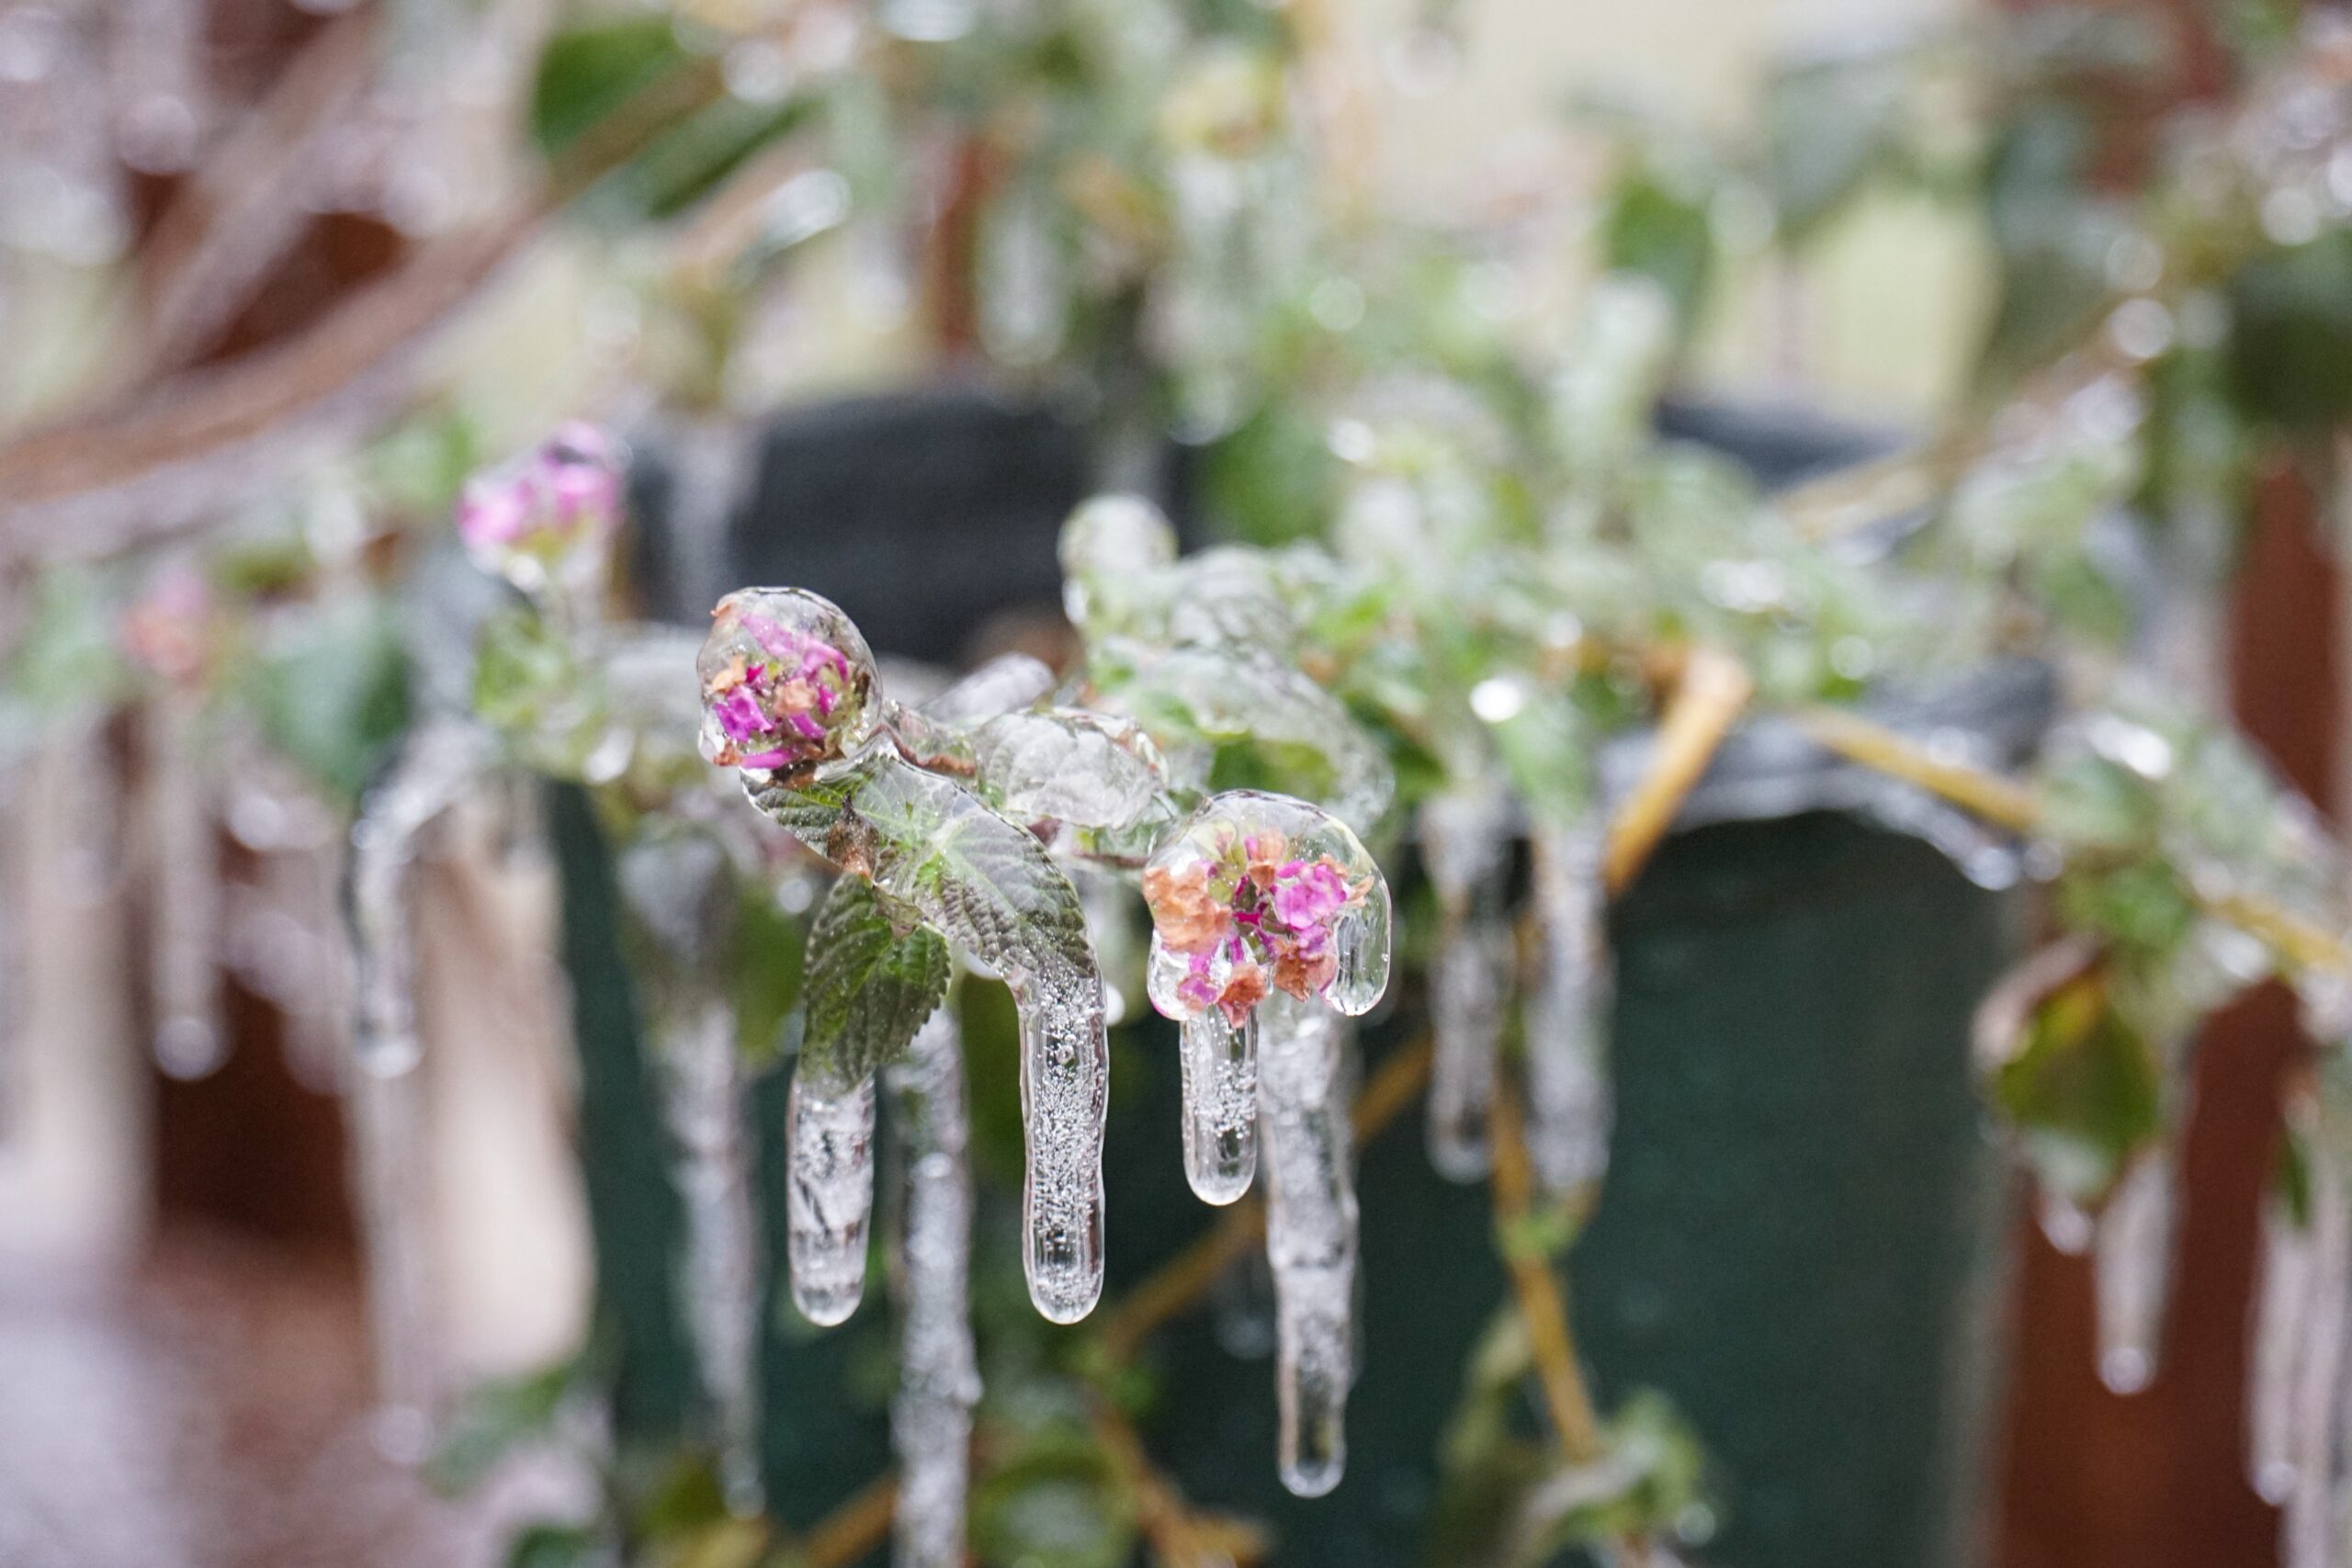 Protecting Your Plants From the Cold